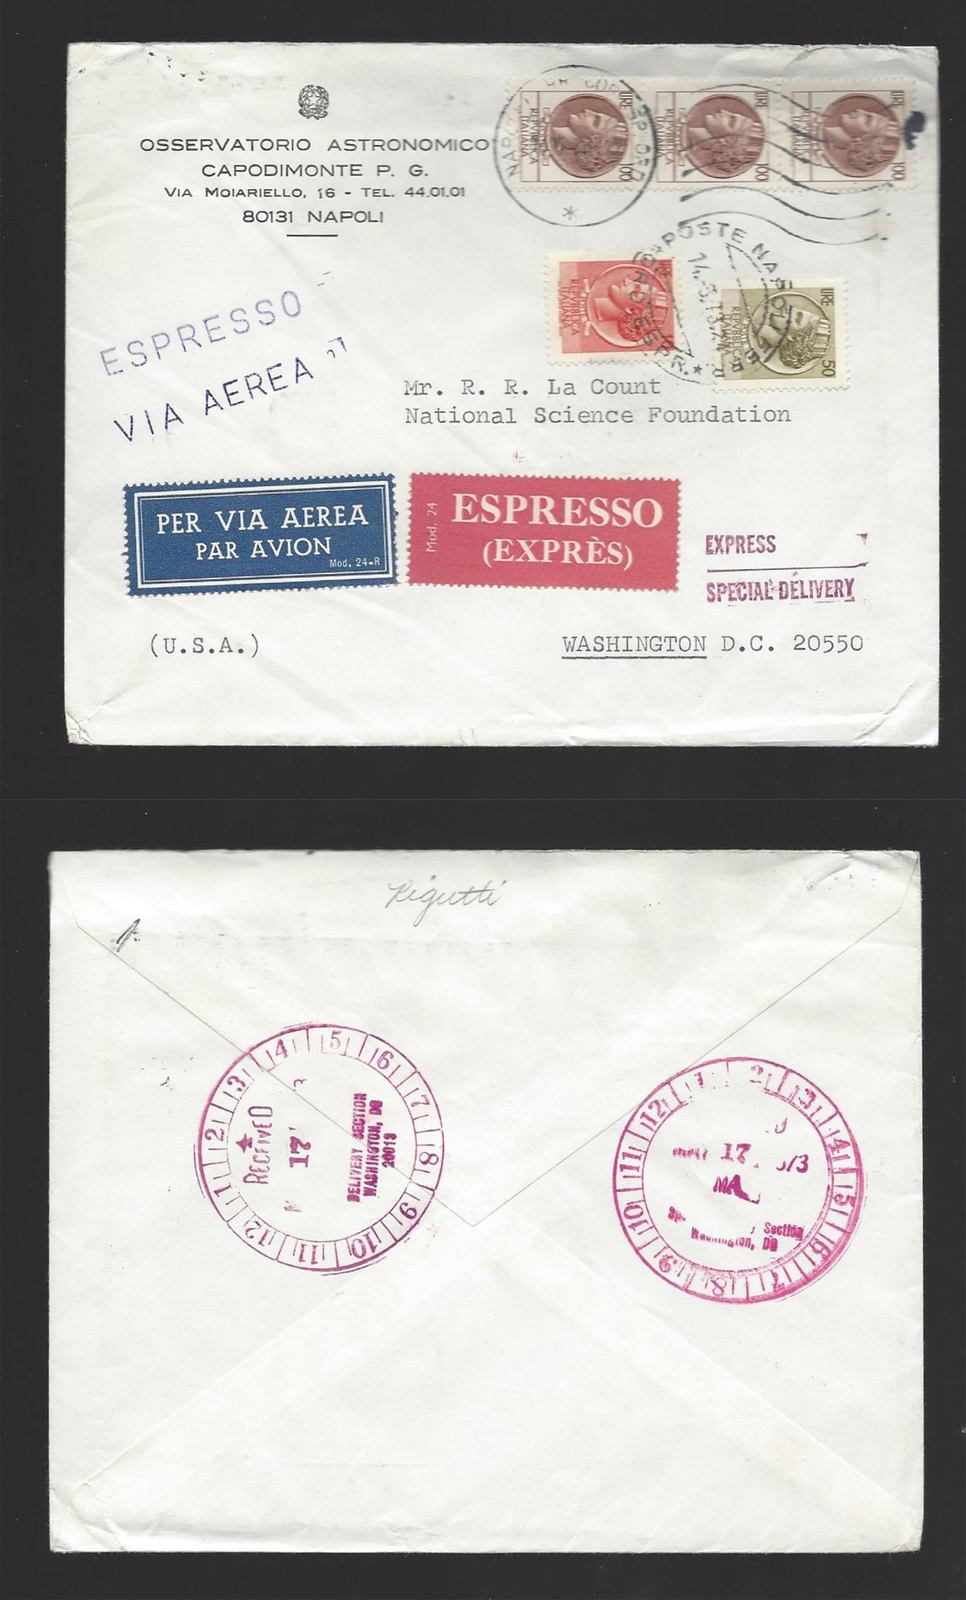 Italy Express Special Delivery Multifranked Airmail 1973 Cover to US Backstamp - $14.50